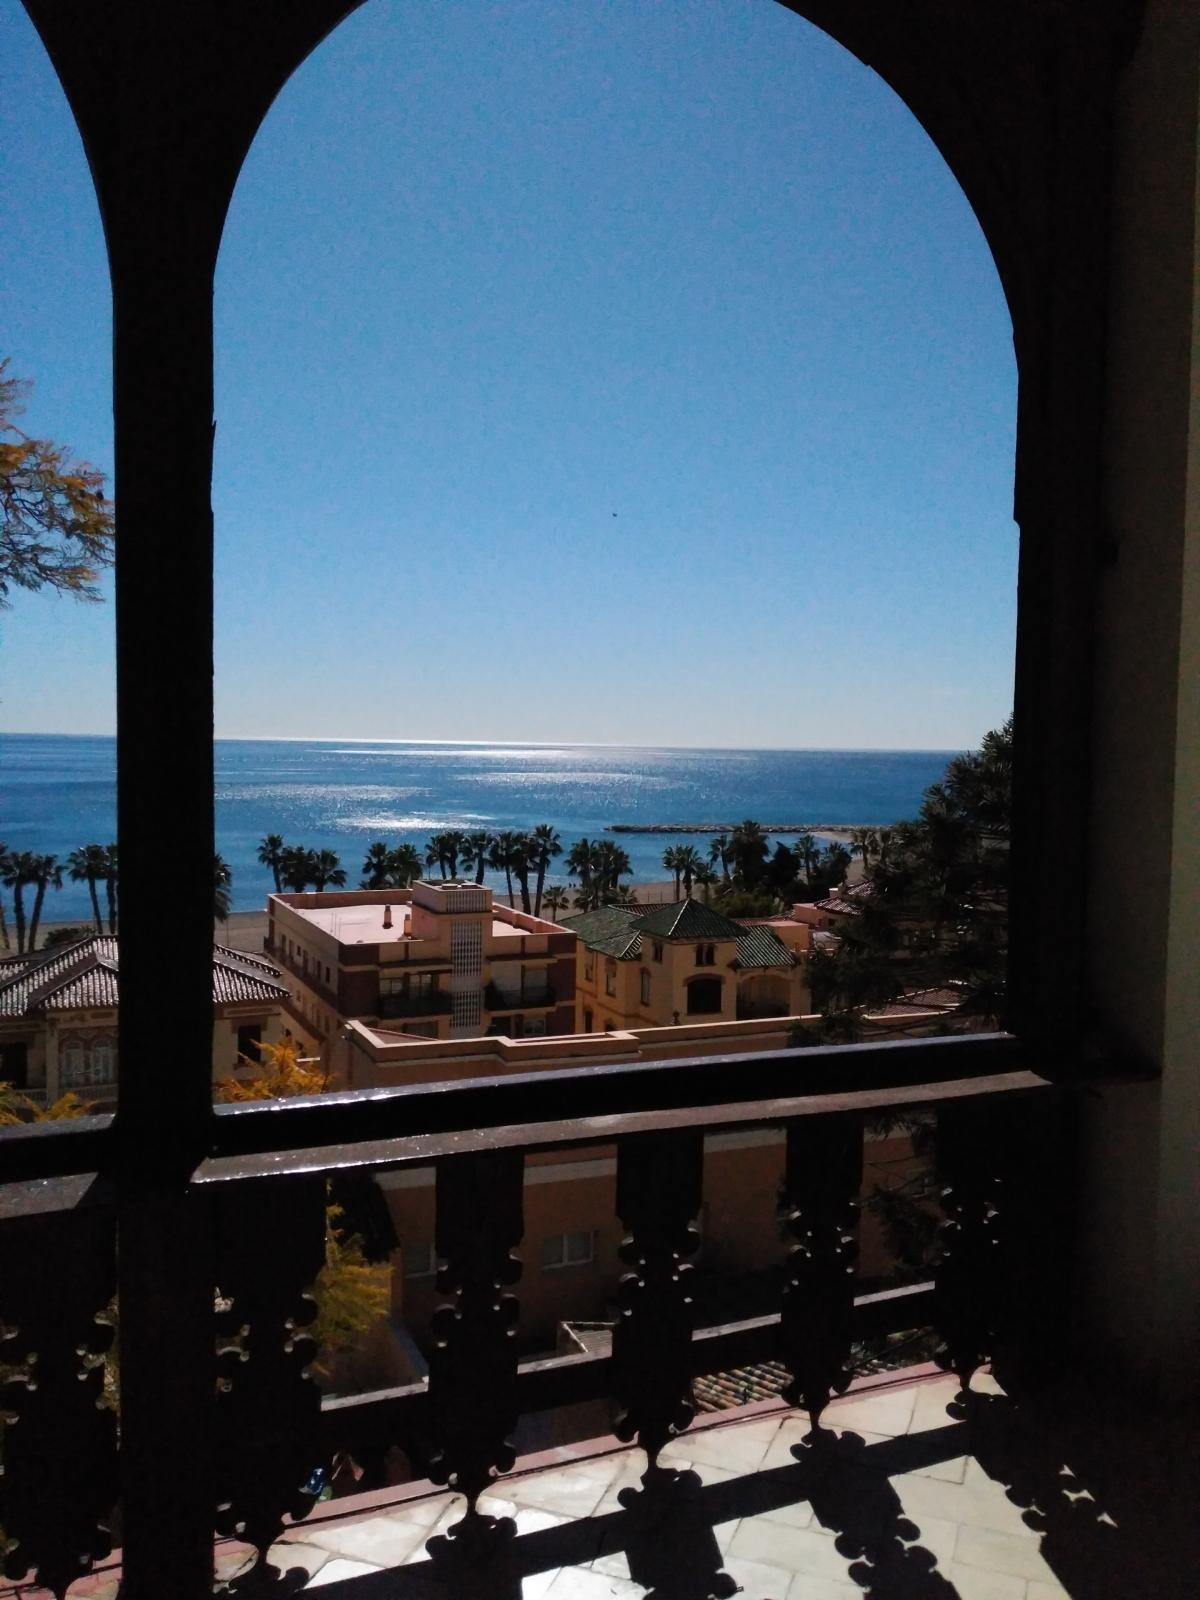 SOLD! NEW PROMOTION WITH SEA VIEWS, TERRACE AND GARDEN. LOCATED IN MONTE DE SANCHA